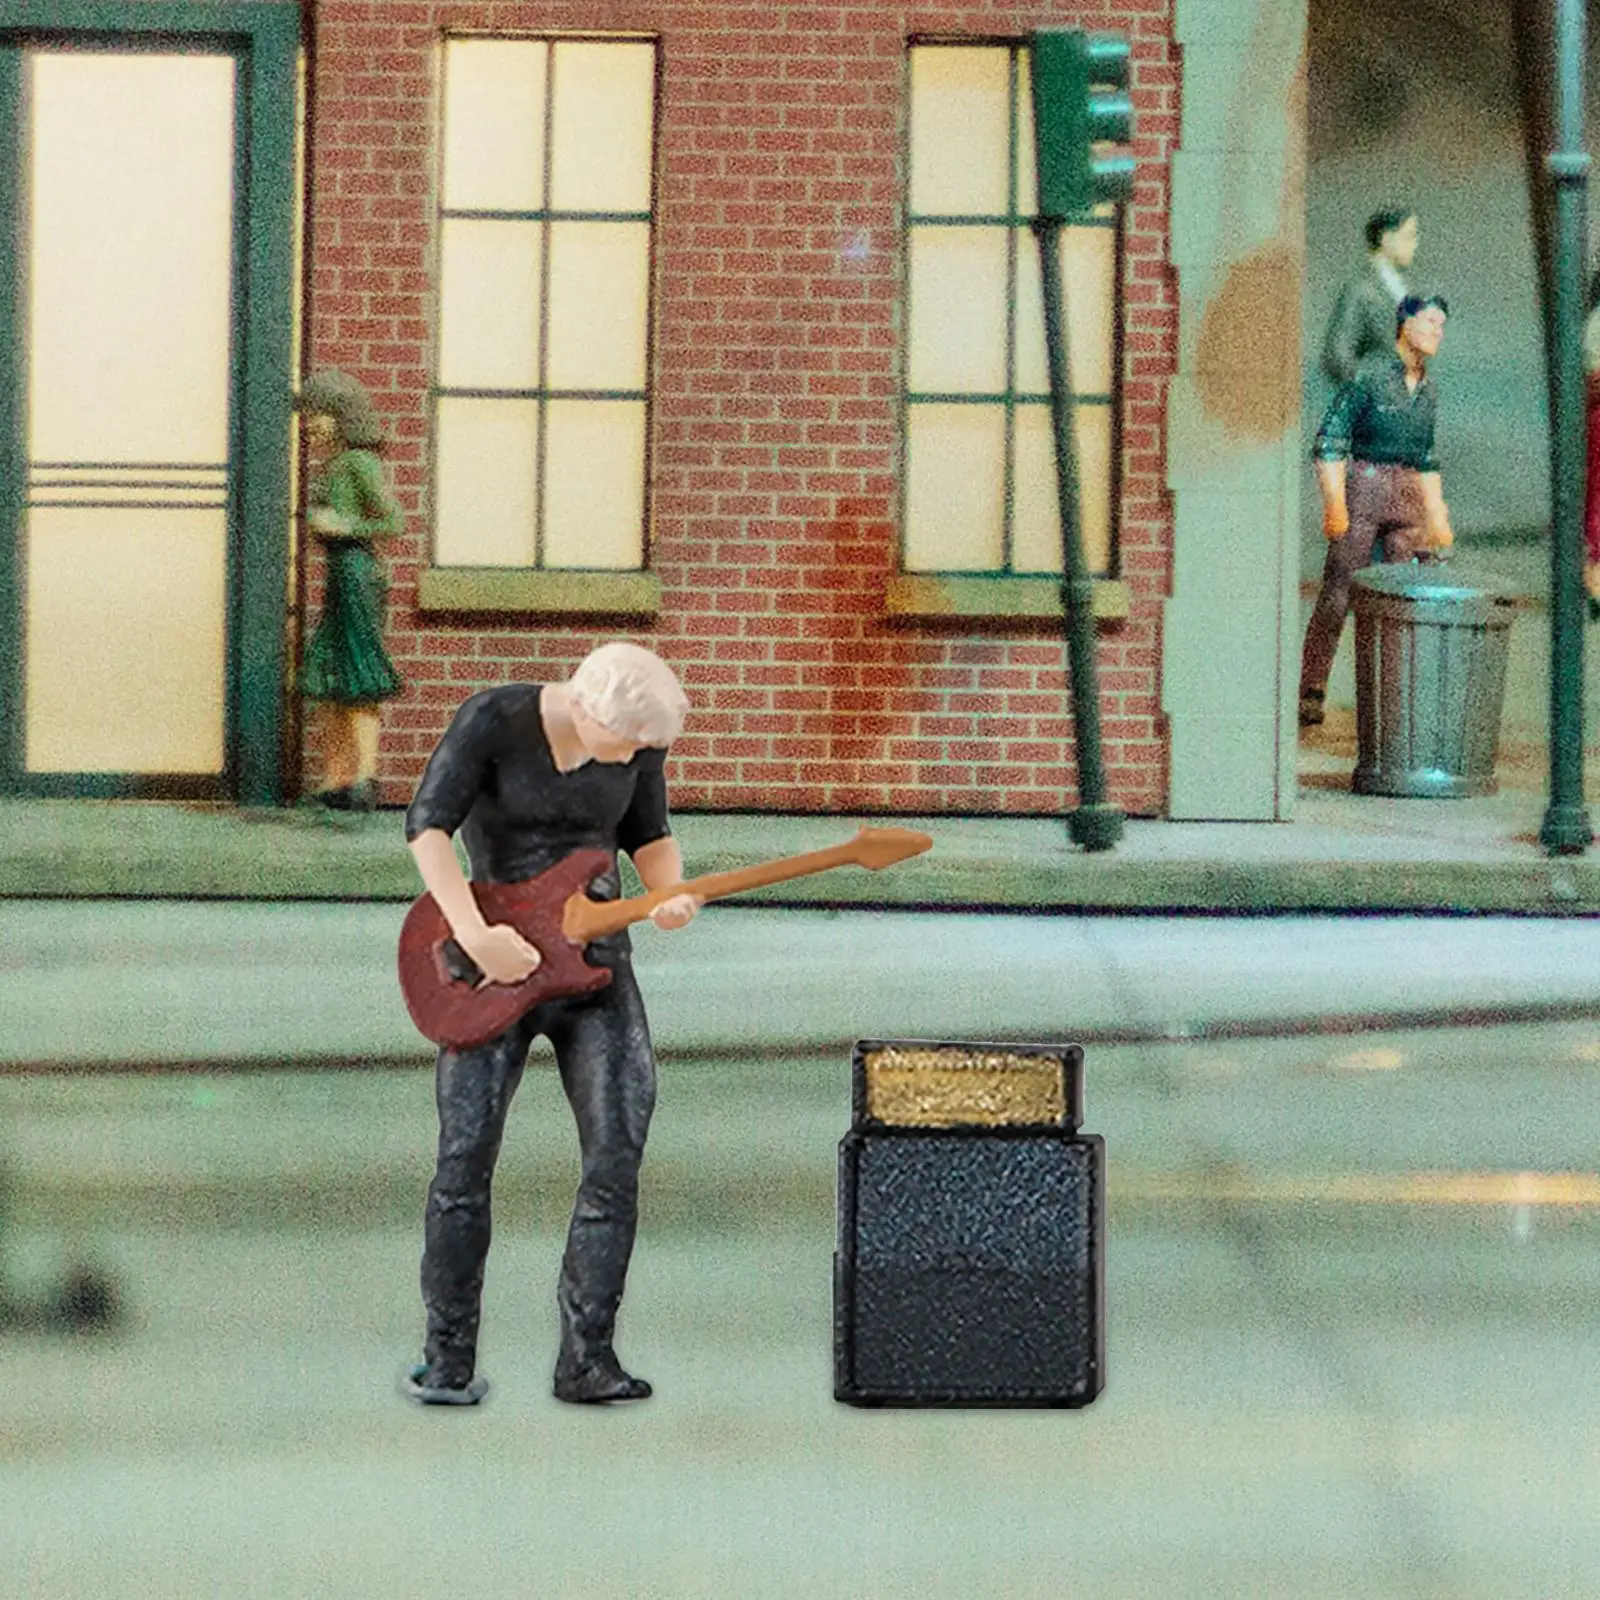 1:64 Scale Miniature People Model Painted Figures for Train Station Layout